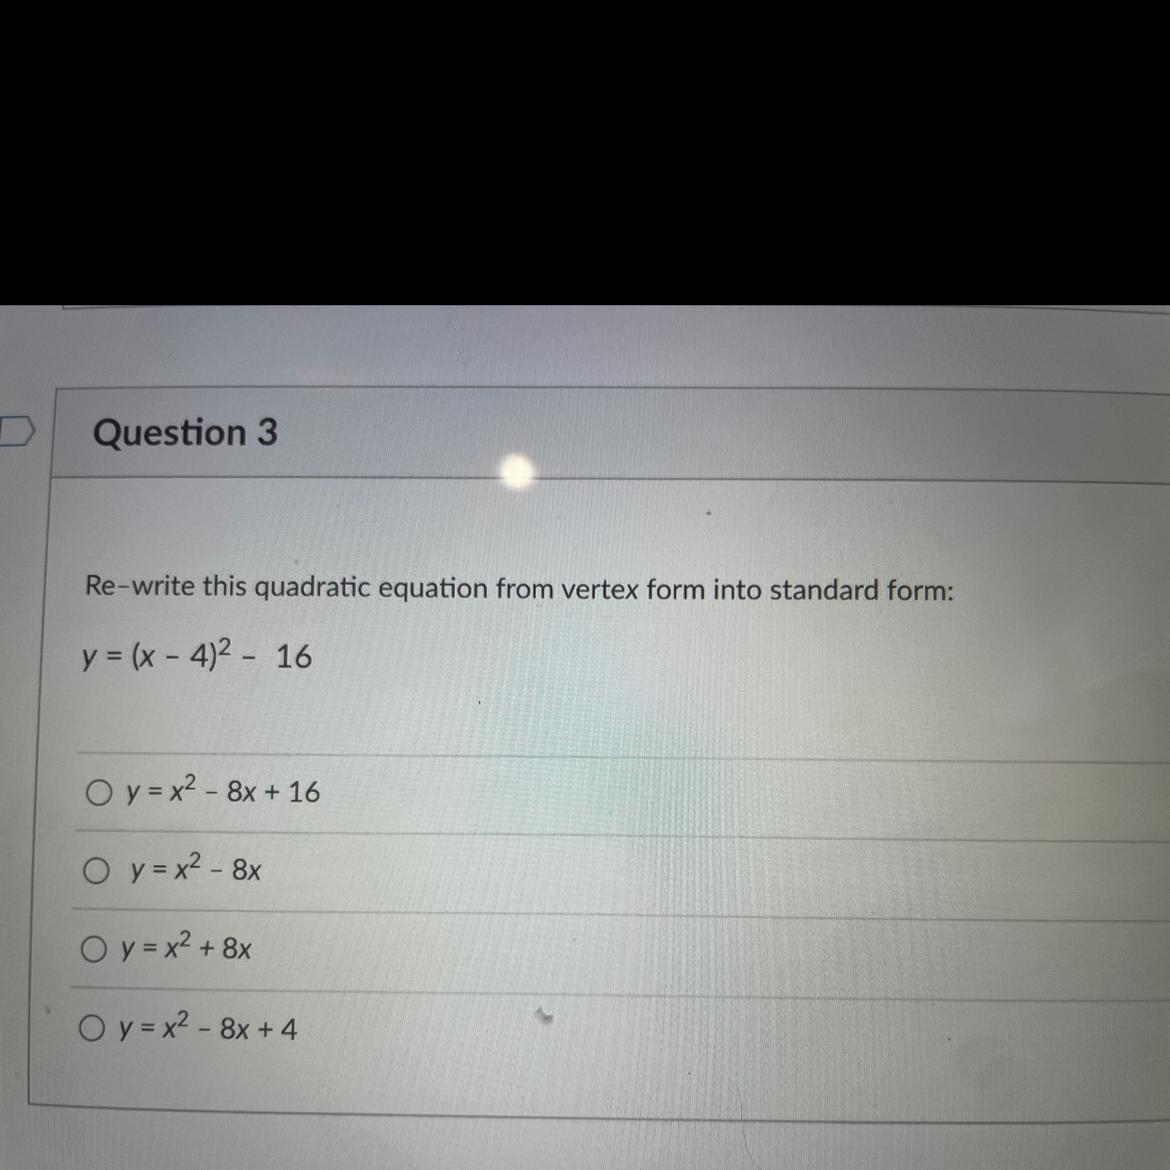 I Need Help With This Question Please. This Is Non-graded. 